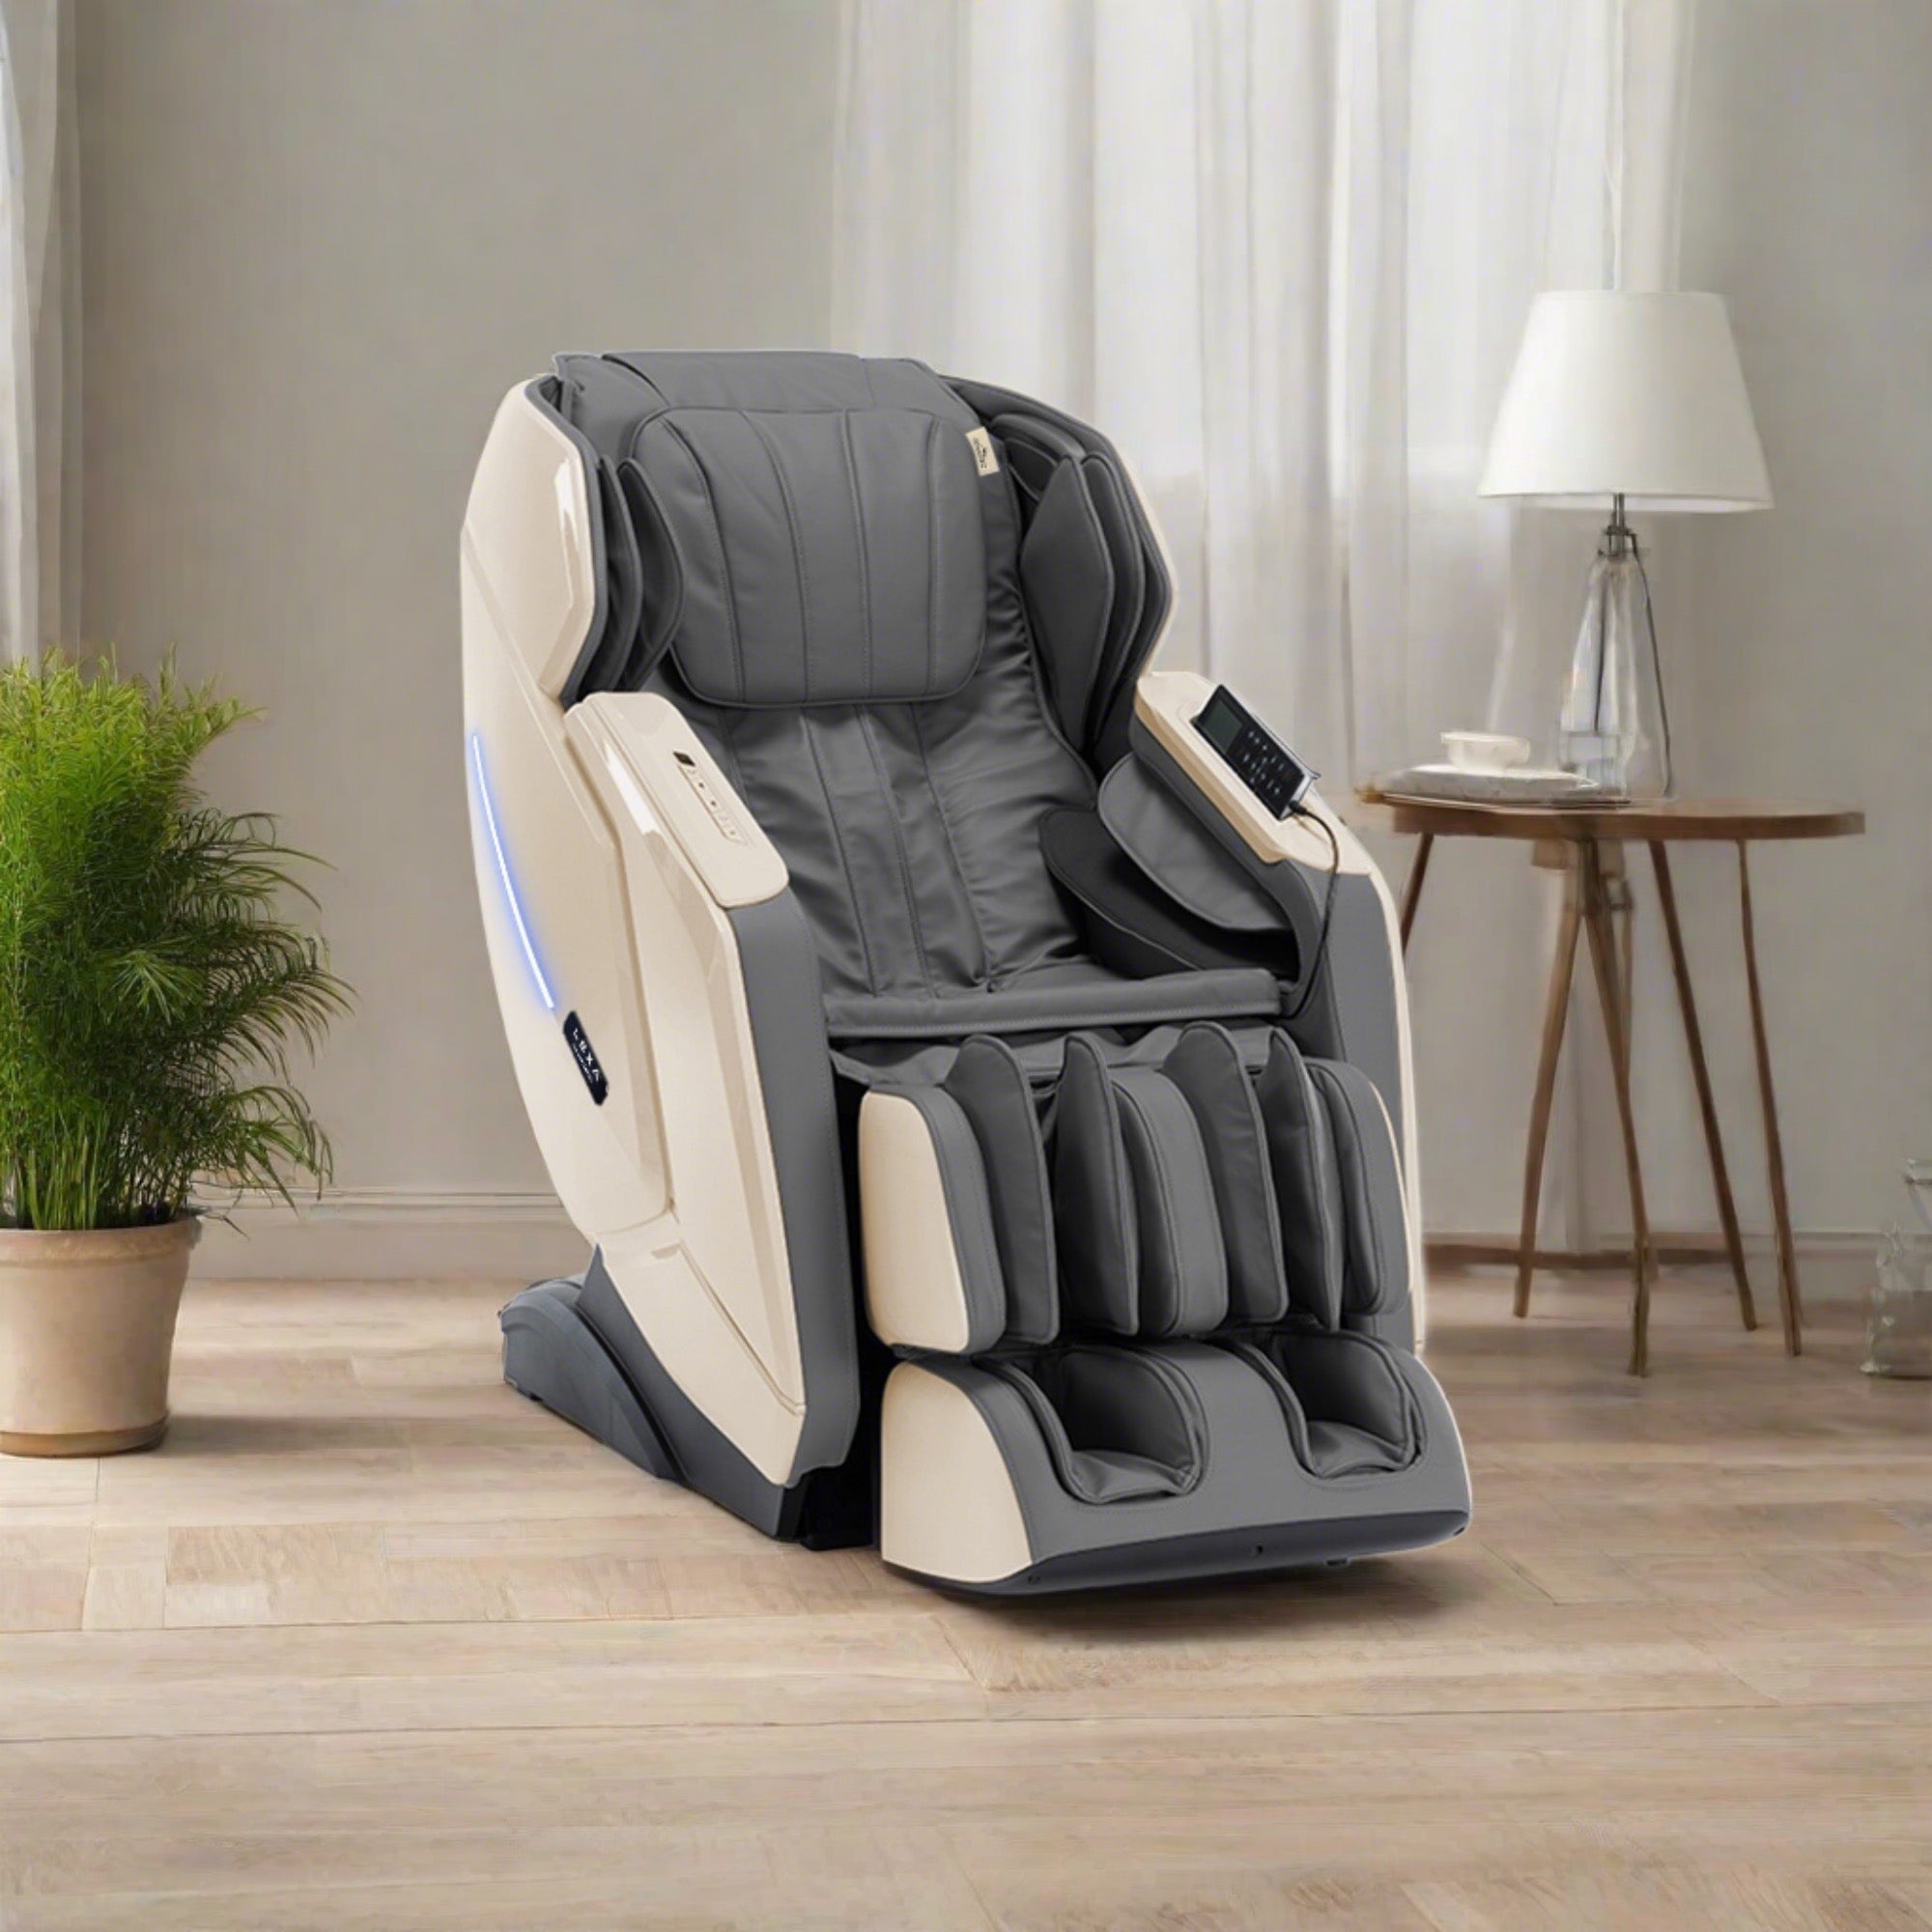 Donnerberg massage chair for home in beige